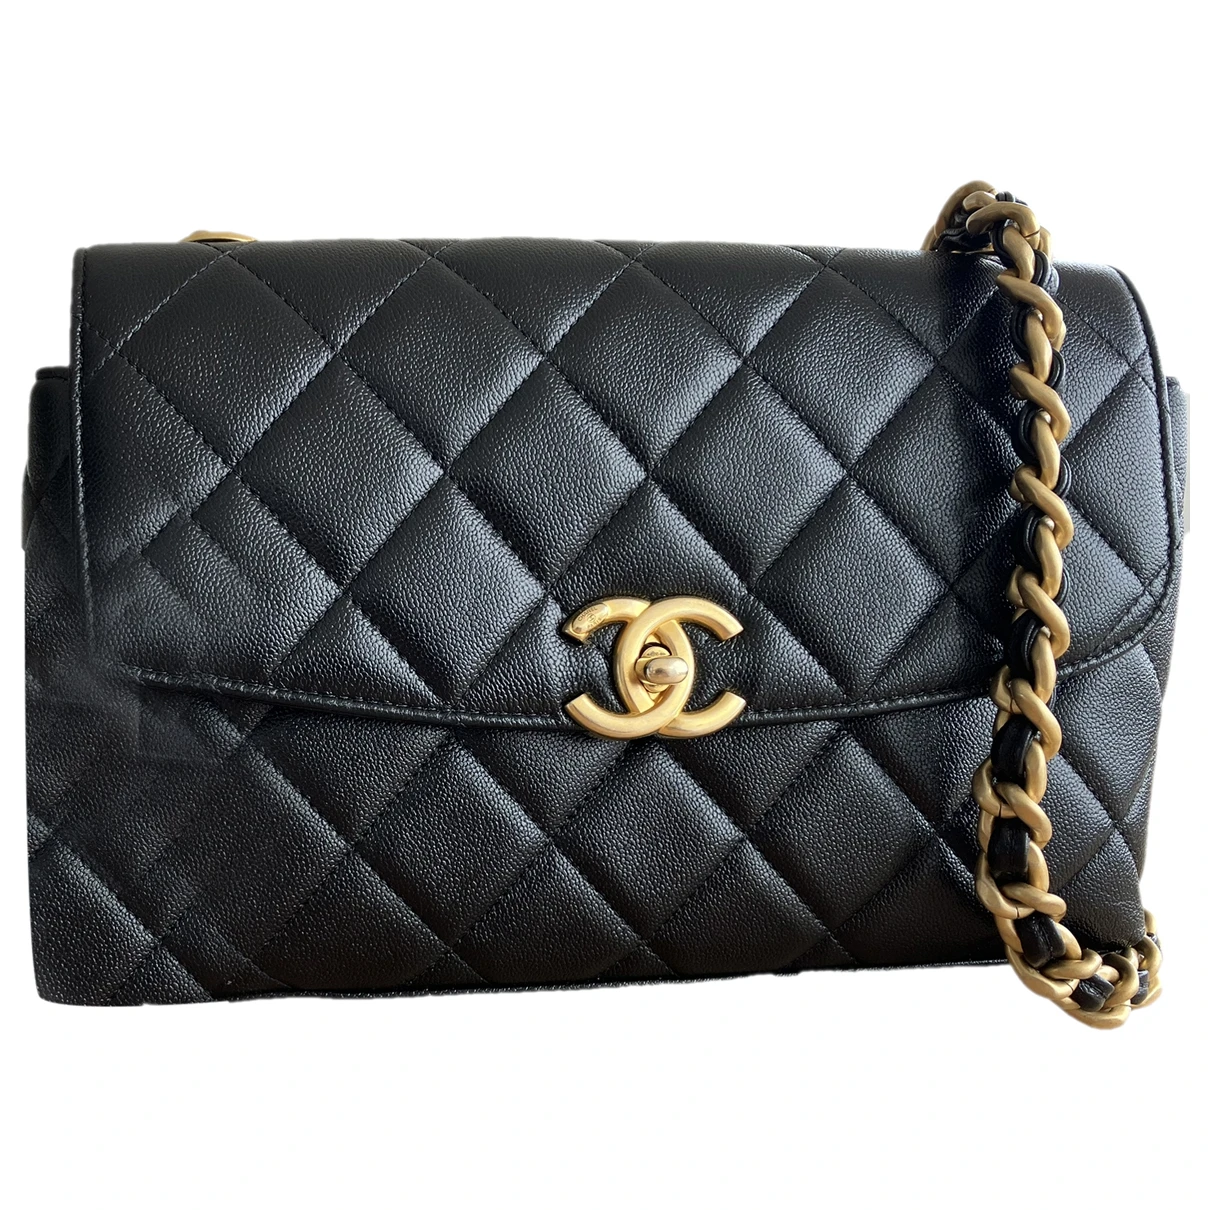 bags Chanel handbags Timeless/Classique for Female Leather. Used condition